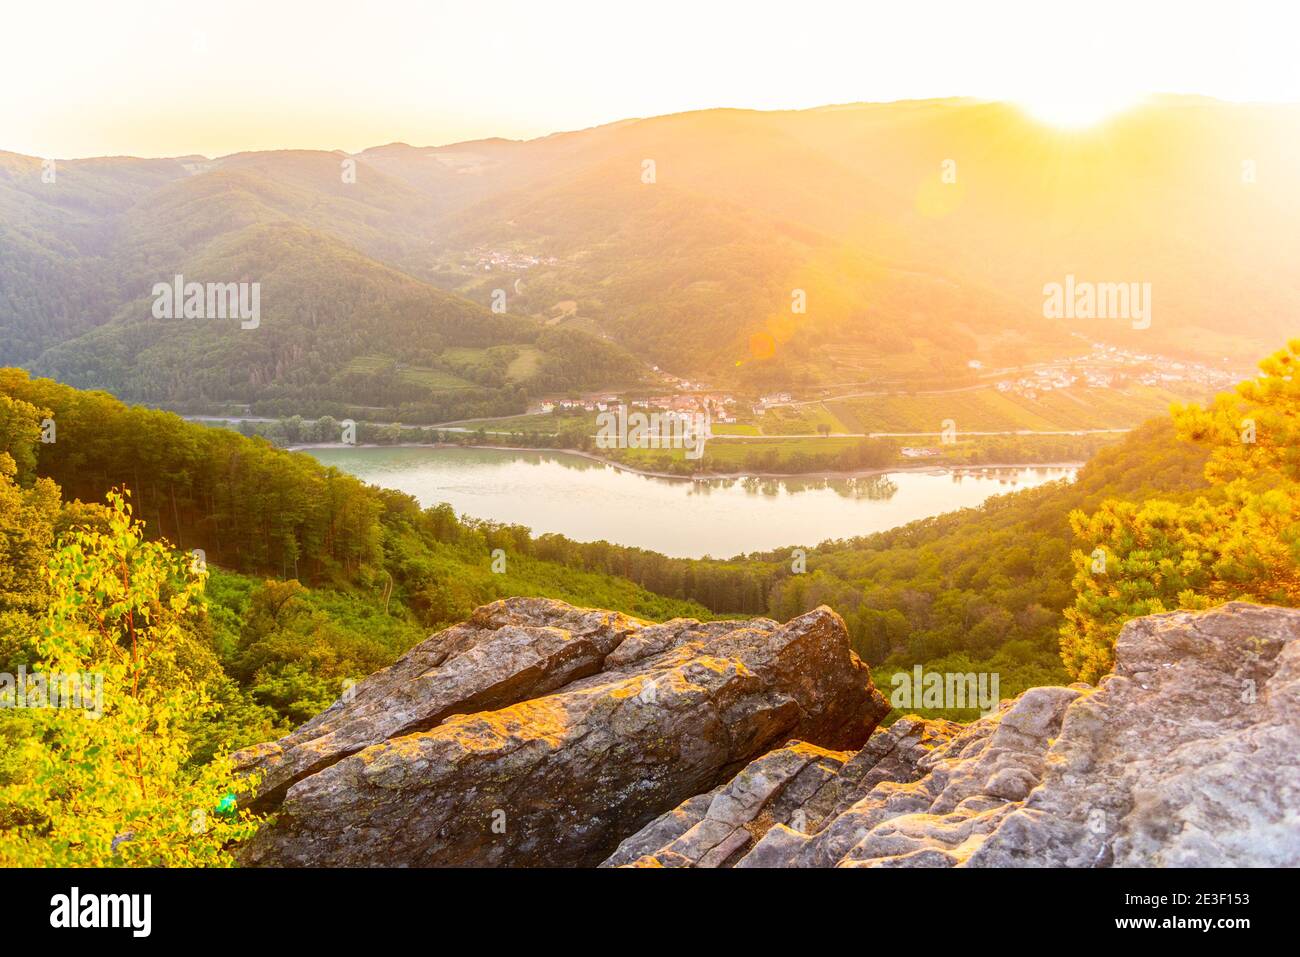 Sunset in Wachau Valley with Danube River, Austria. Stock Photo